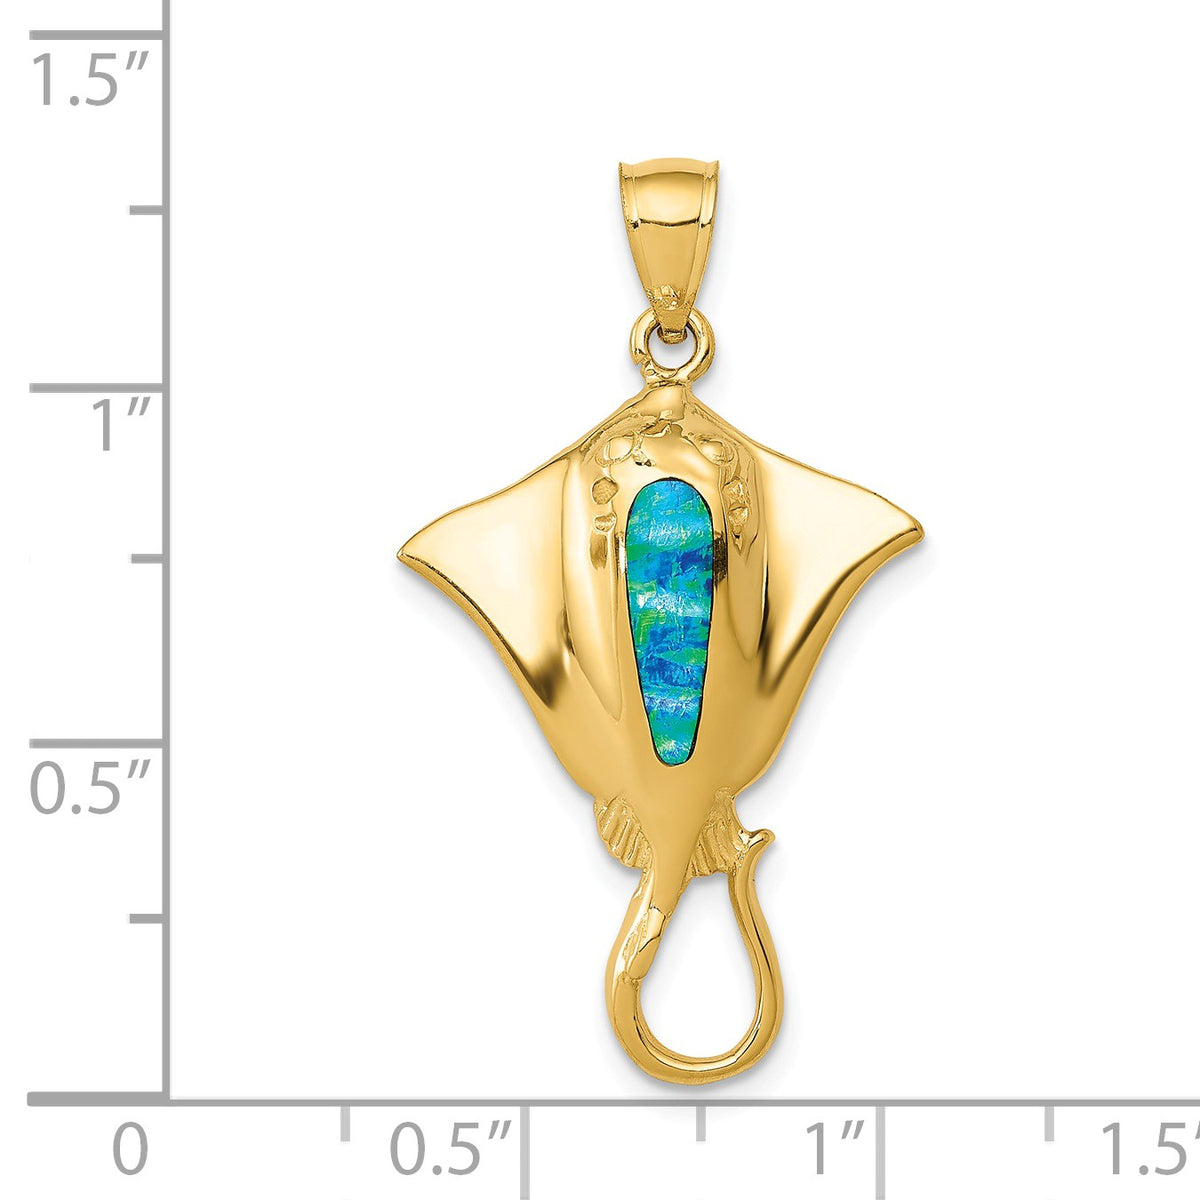 Alternate view of the 14k Yellow Gold &amp; Synthetic Blue Opal Textured Pendant, 20 x 33mm by The Black Bow Jewelry Co.